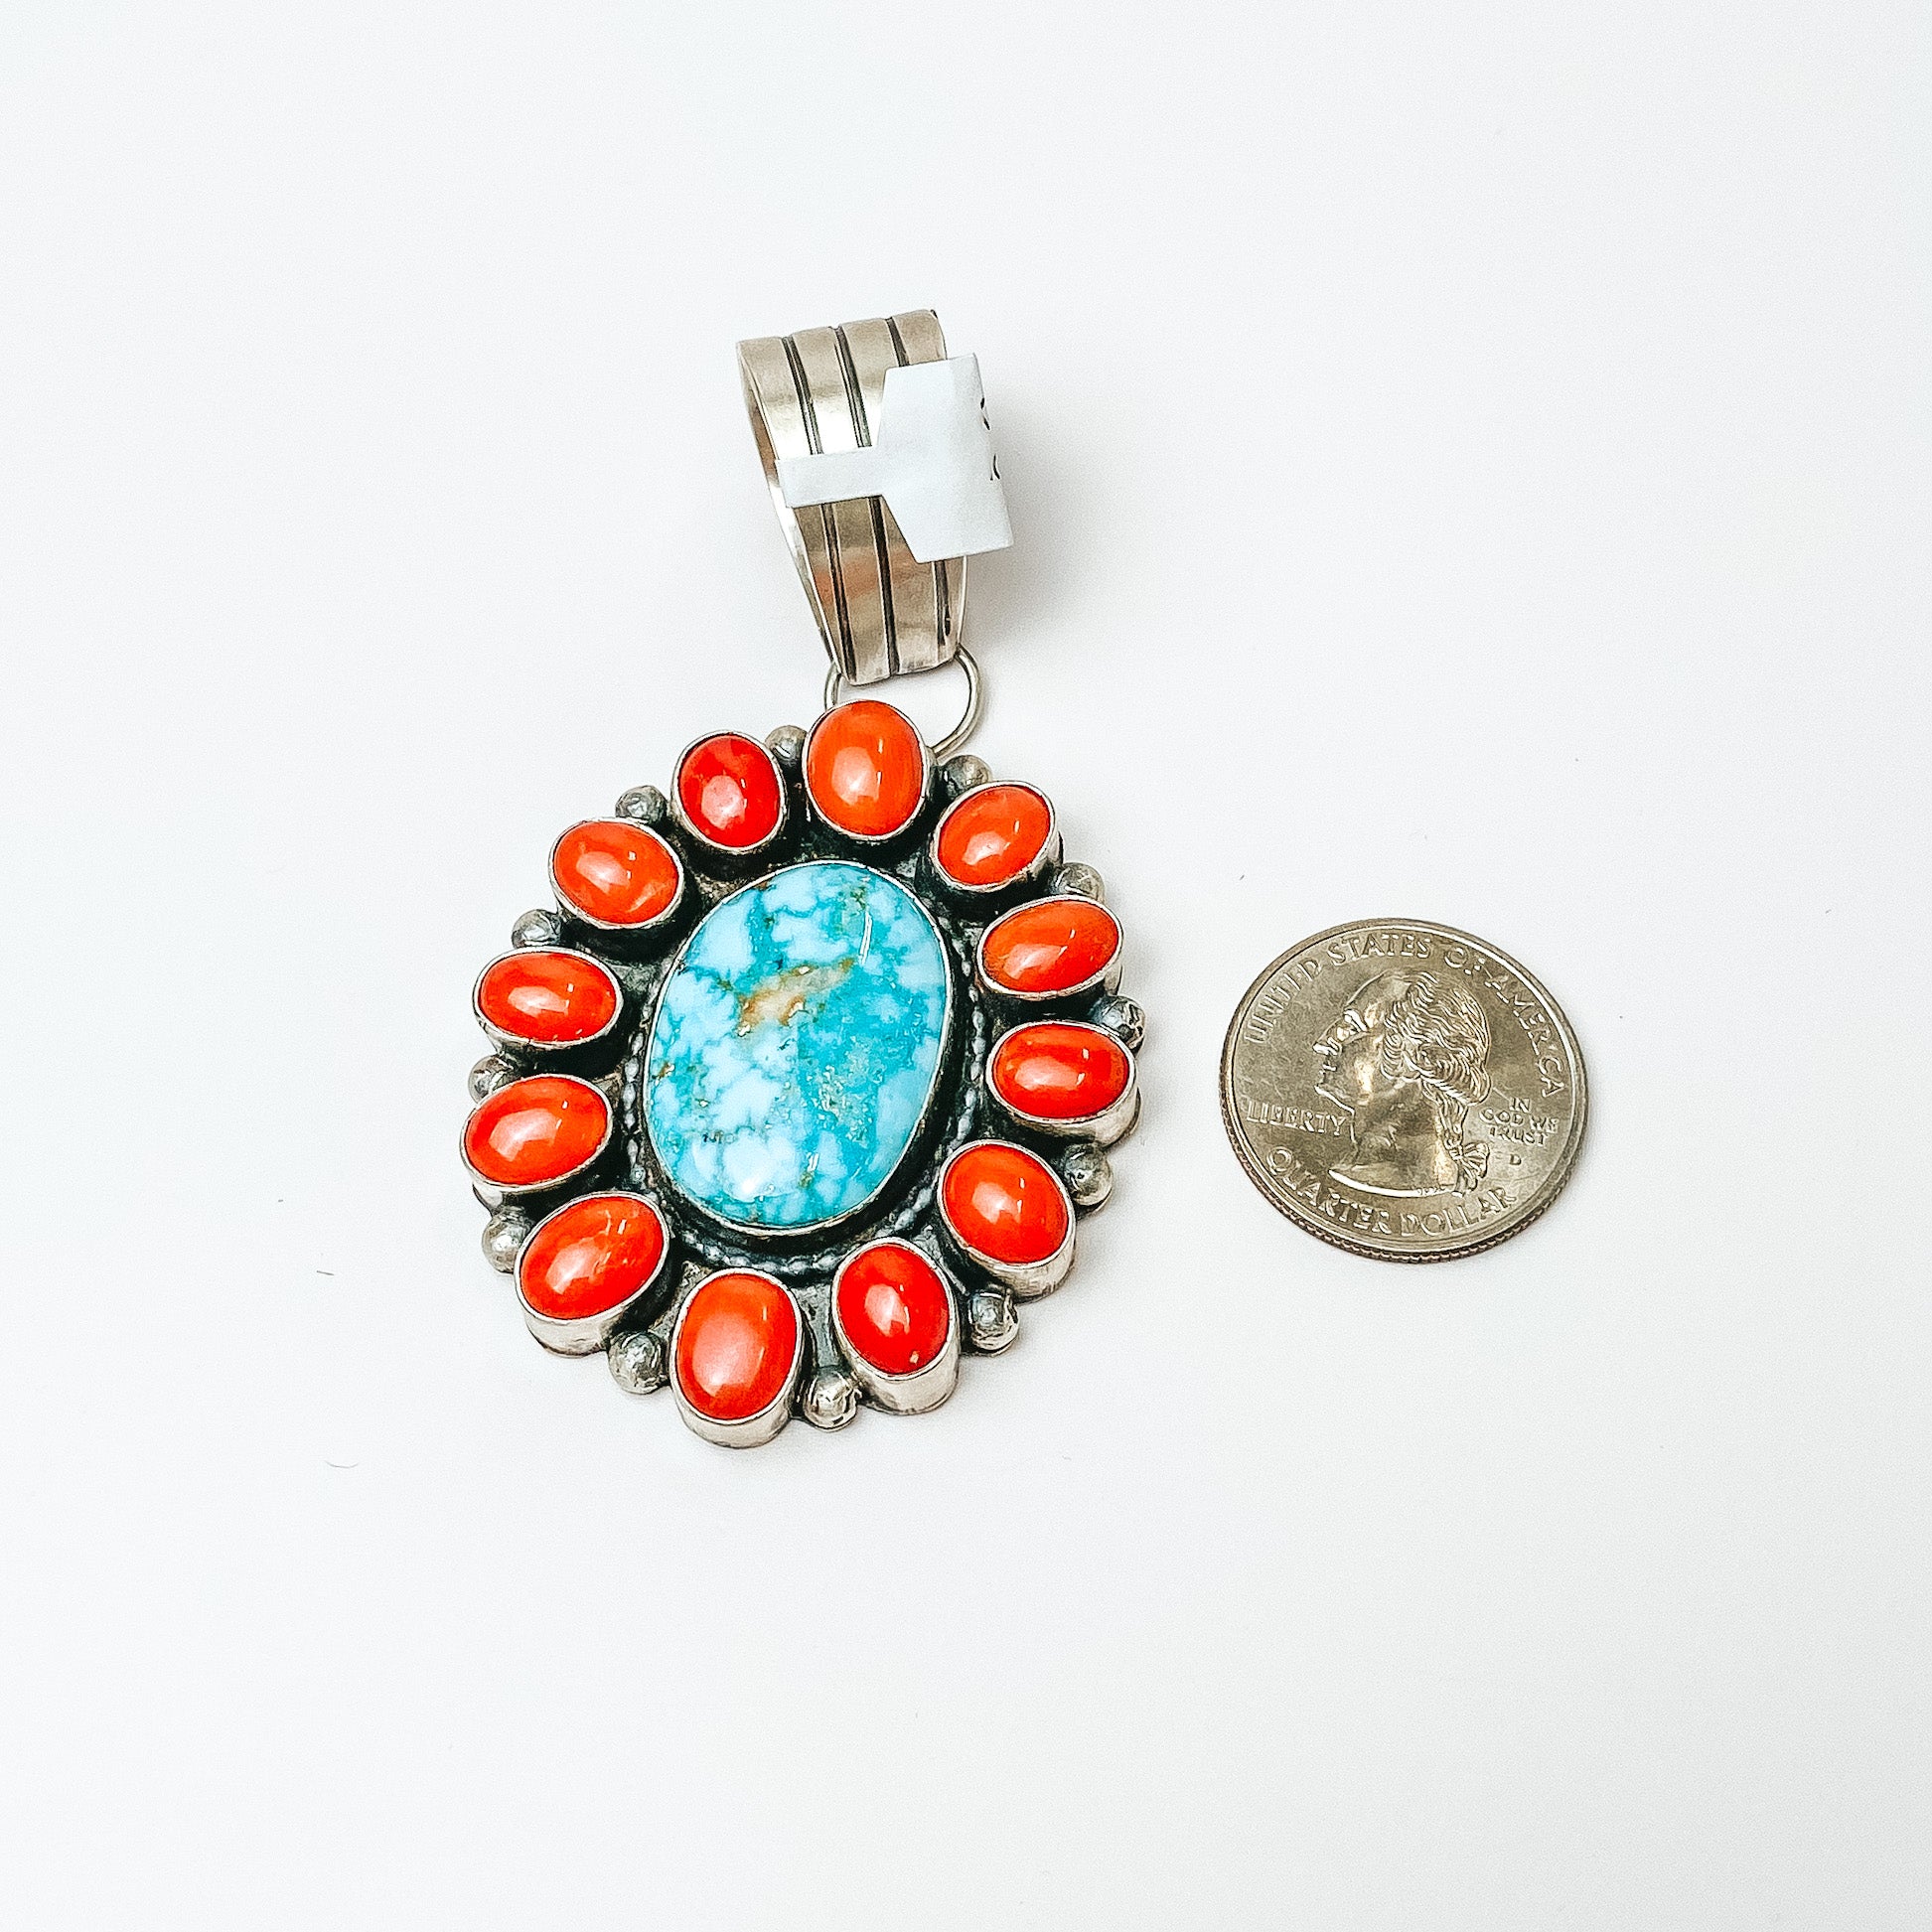 Tatum Skeets | Navajo Handmade Sterling Silver Coral and Turquoise Stone Cluster Pendant - Giddy Up Glamour Boutique